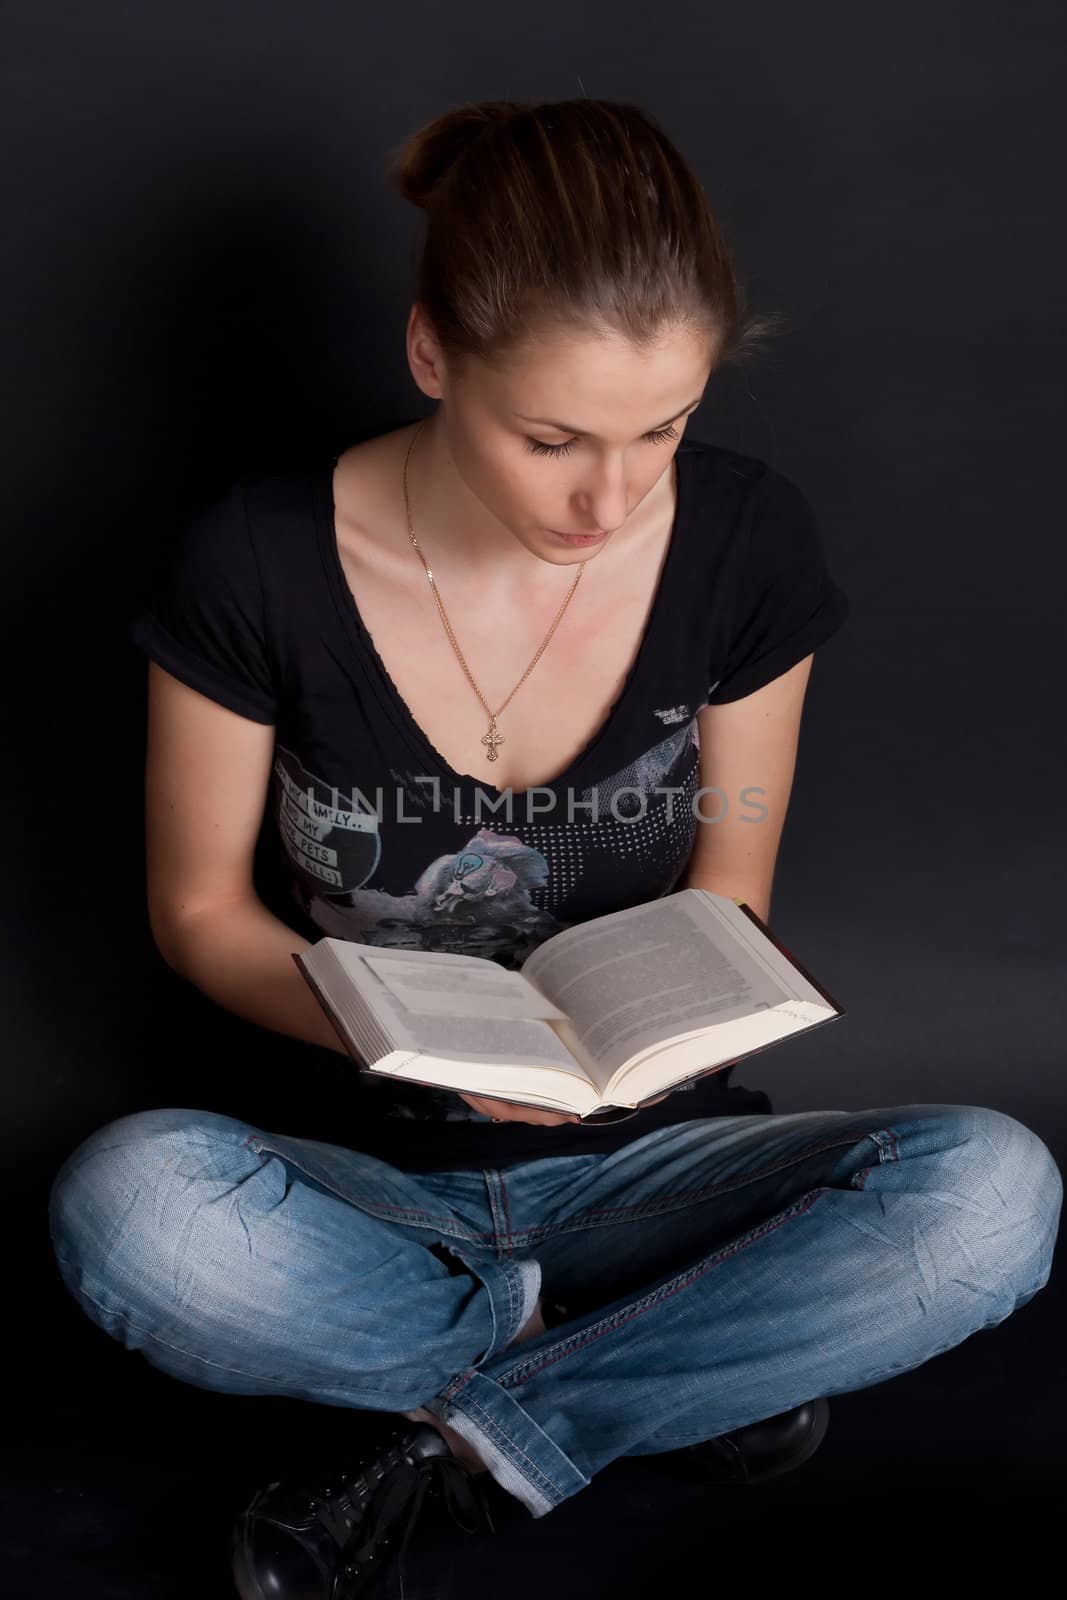 The girl in blue jeans sitting on the floor and reading a book studio photography